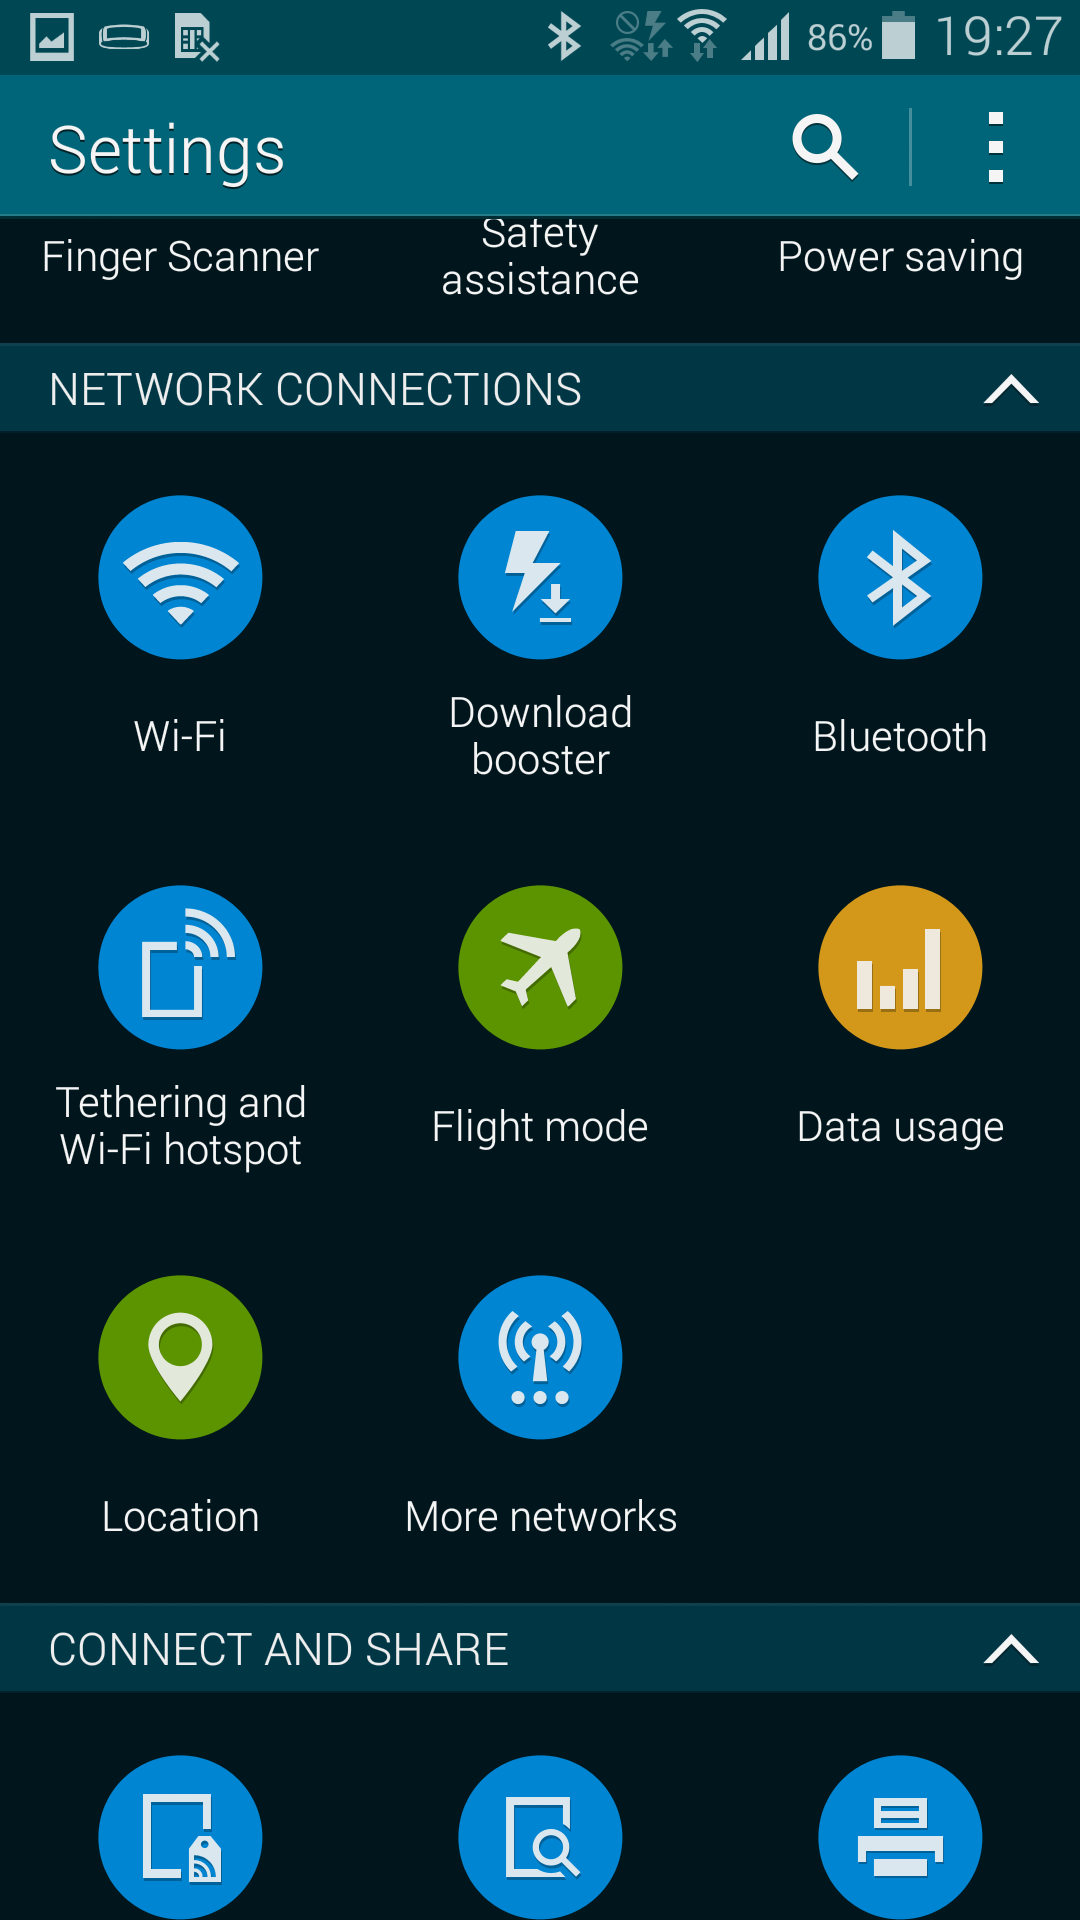 samsung galaxy s5 settings page download booster